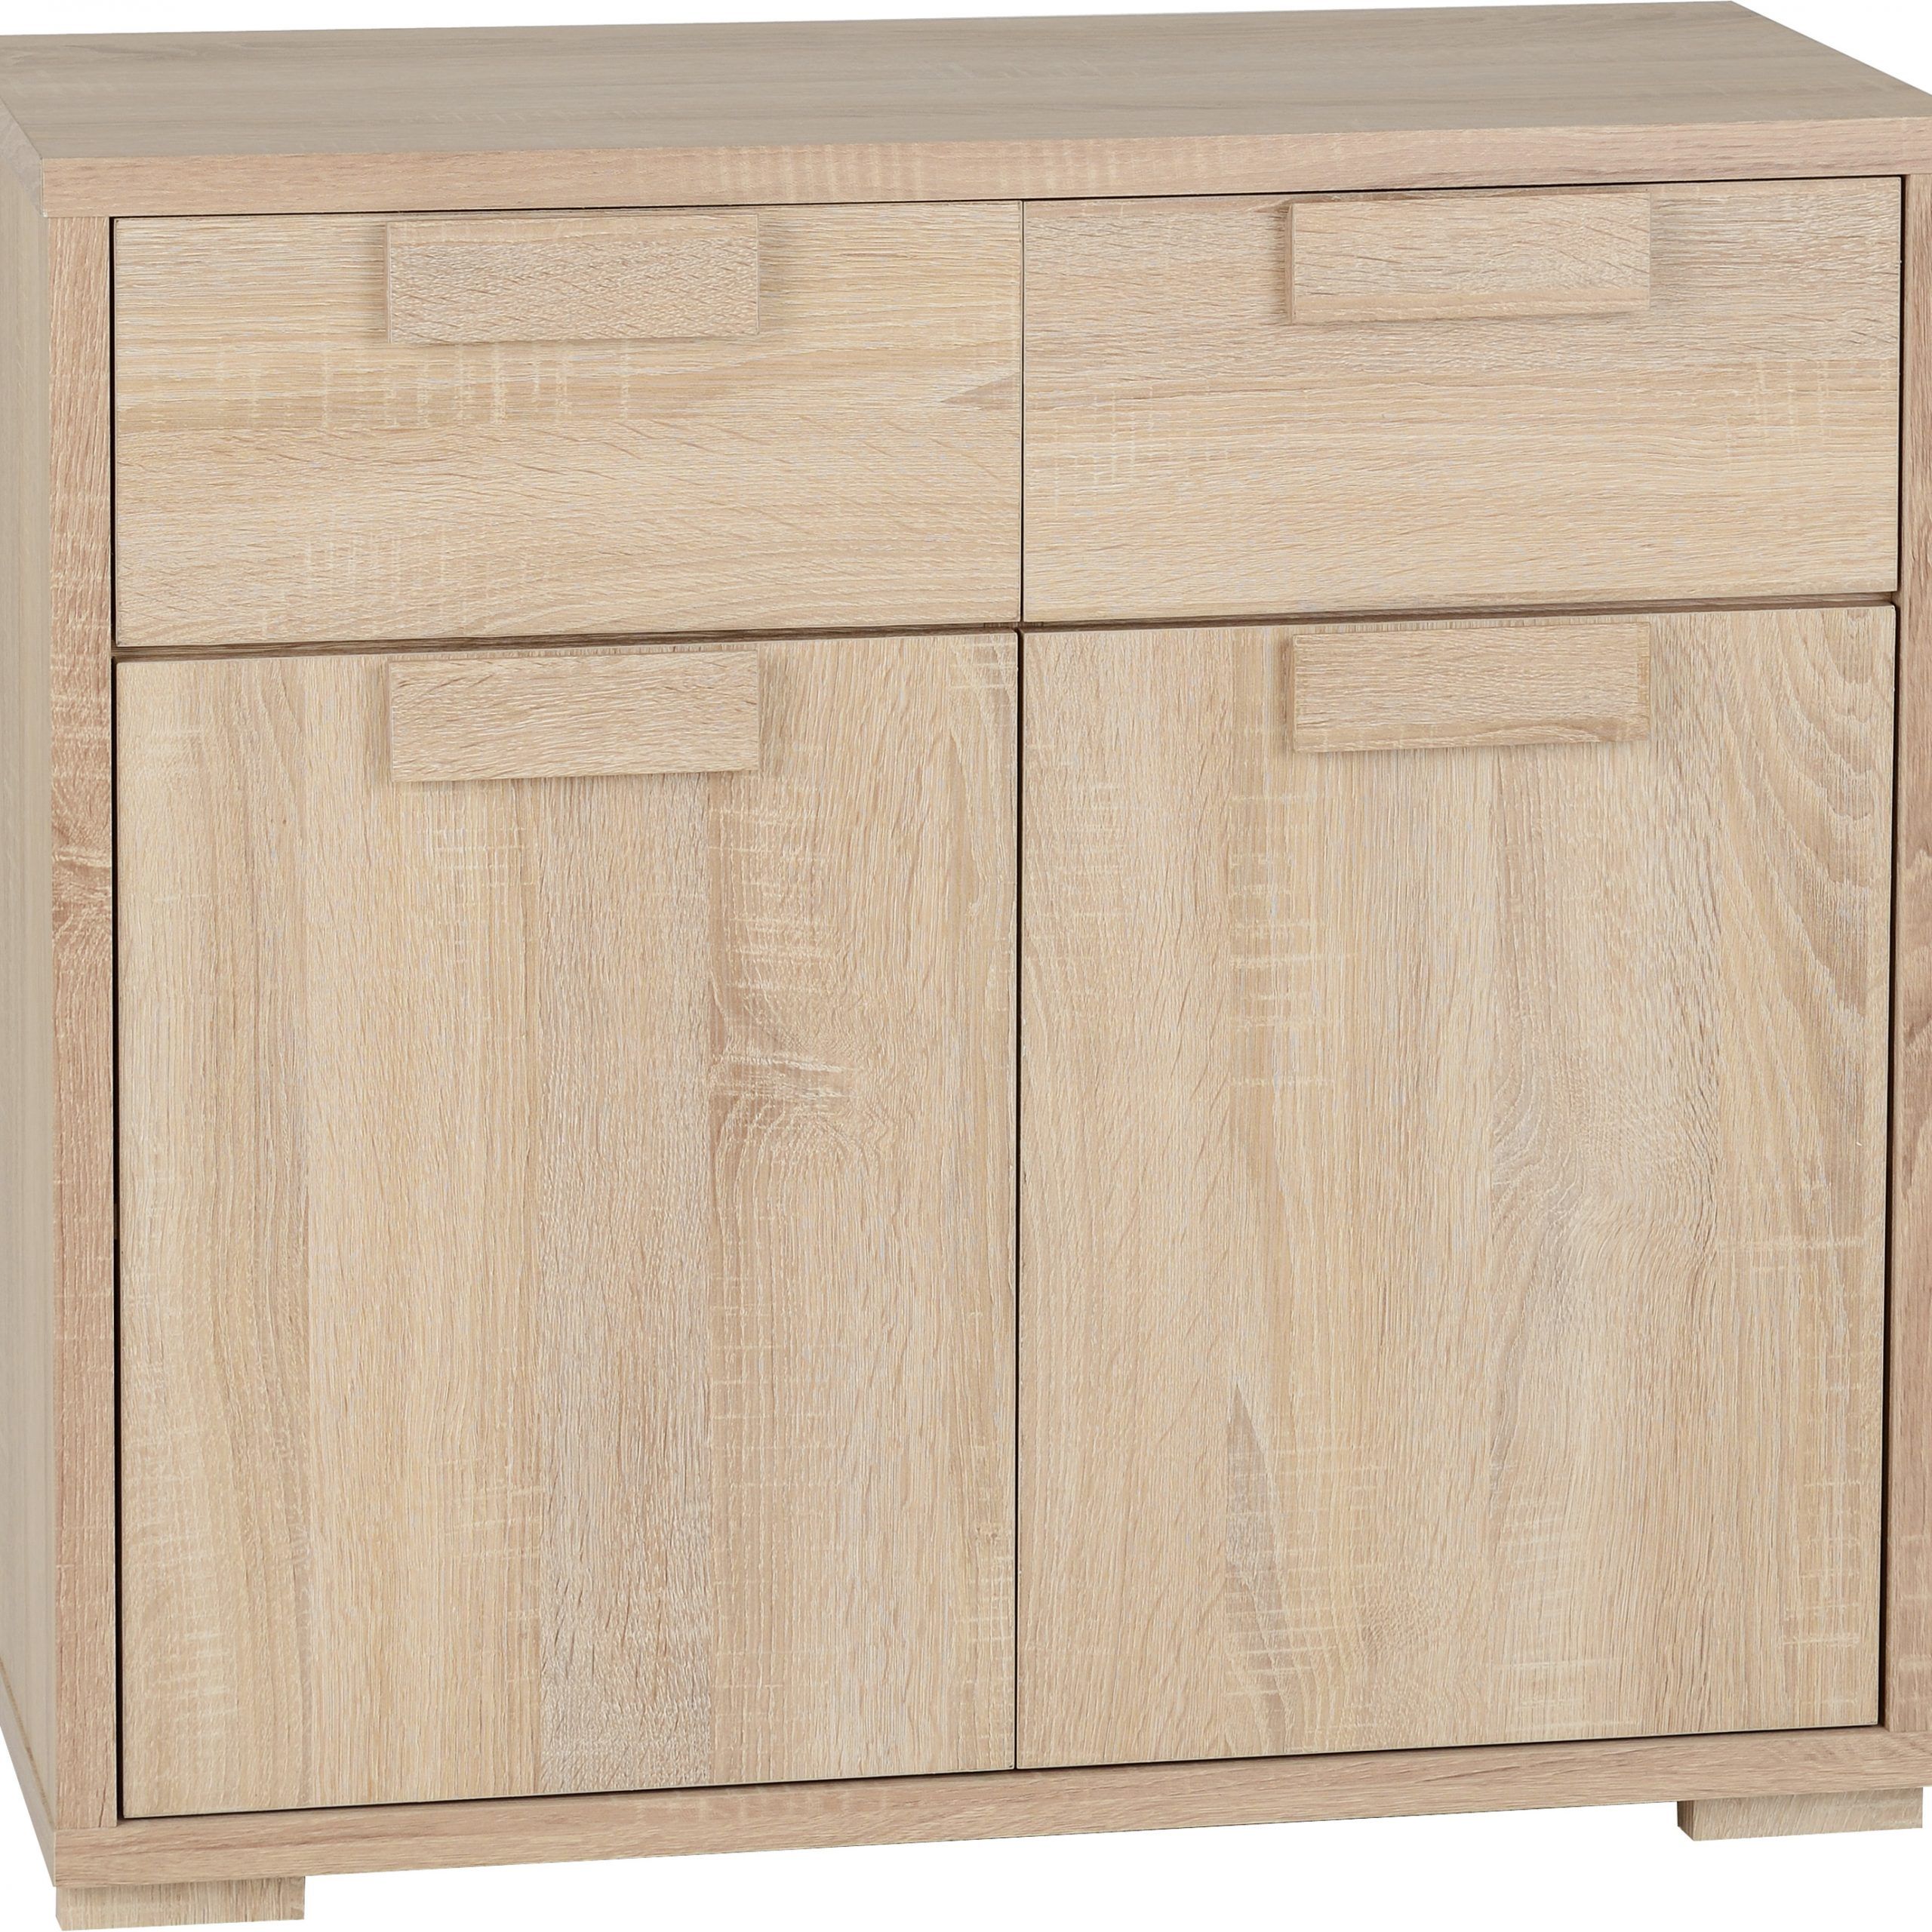 Cambourne 2 Door 2 Drawer Sideboard In Sonoma Oak Effect Pertaining To Cambourne Tv Stands (View 6 of 15)